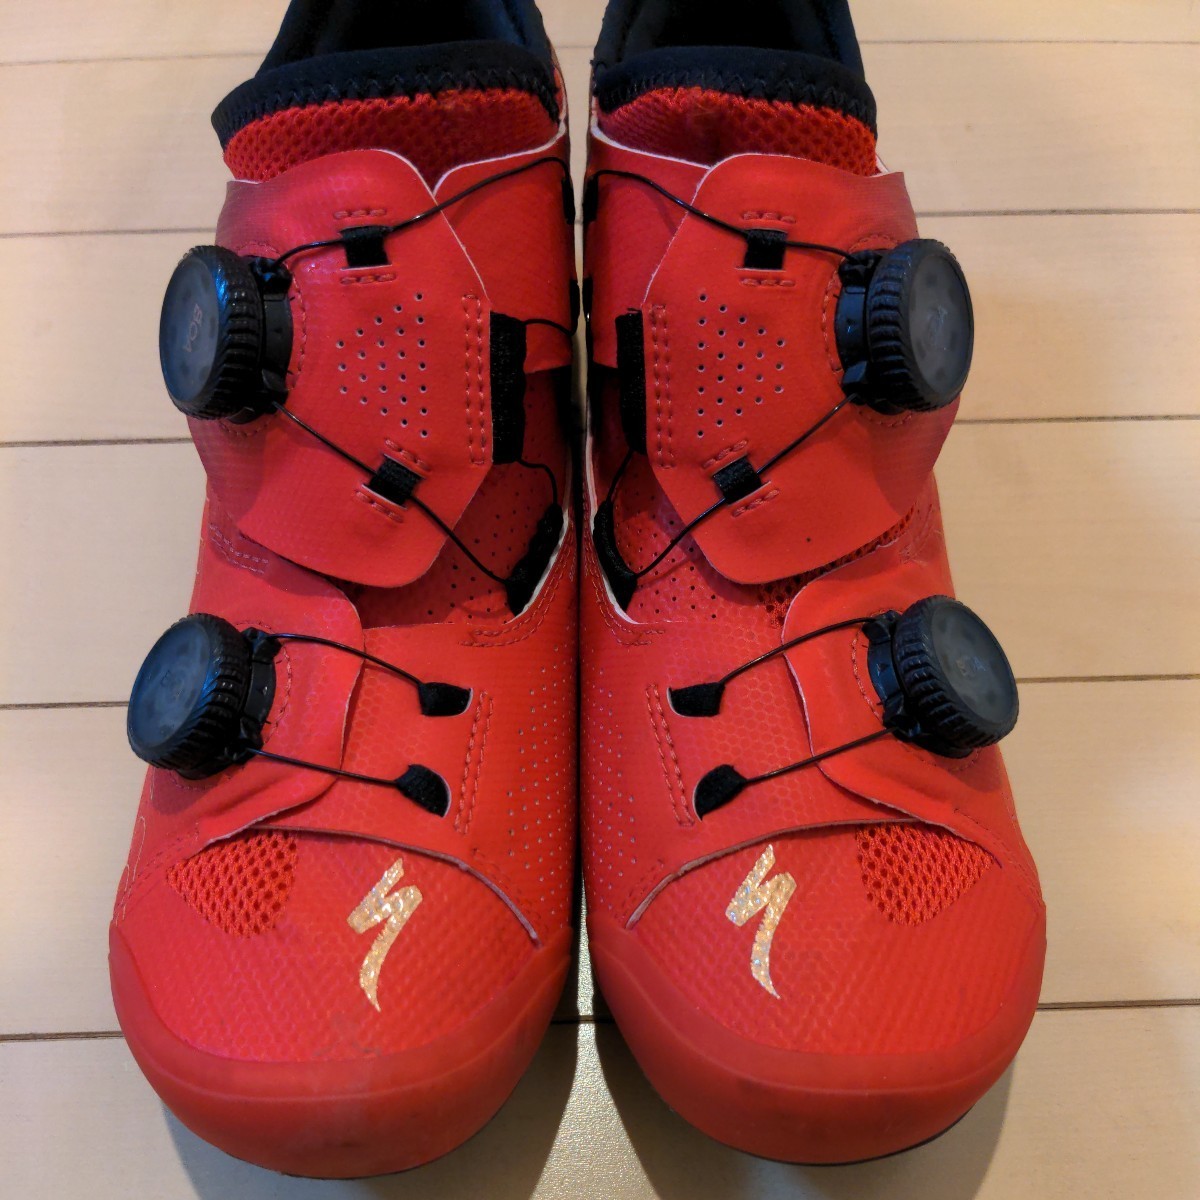 25cm～ S-WORKS ARES ROAD SHOES 39.0